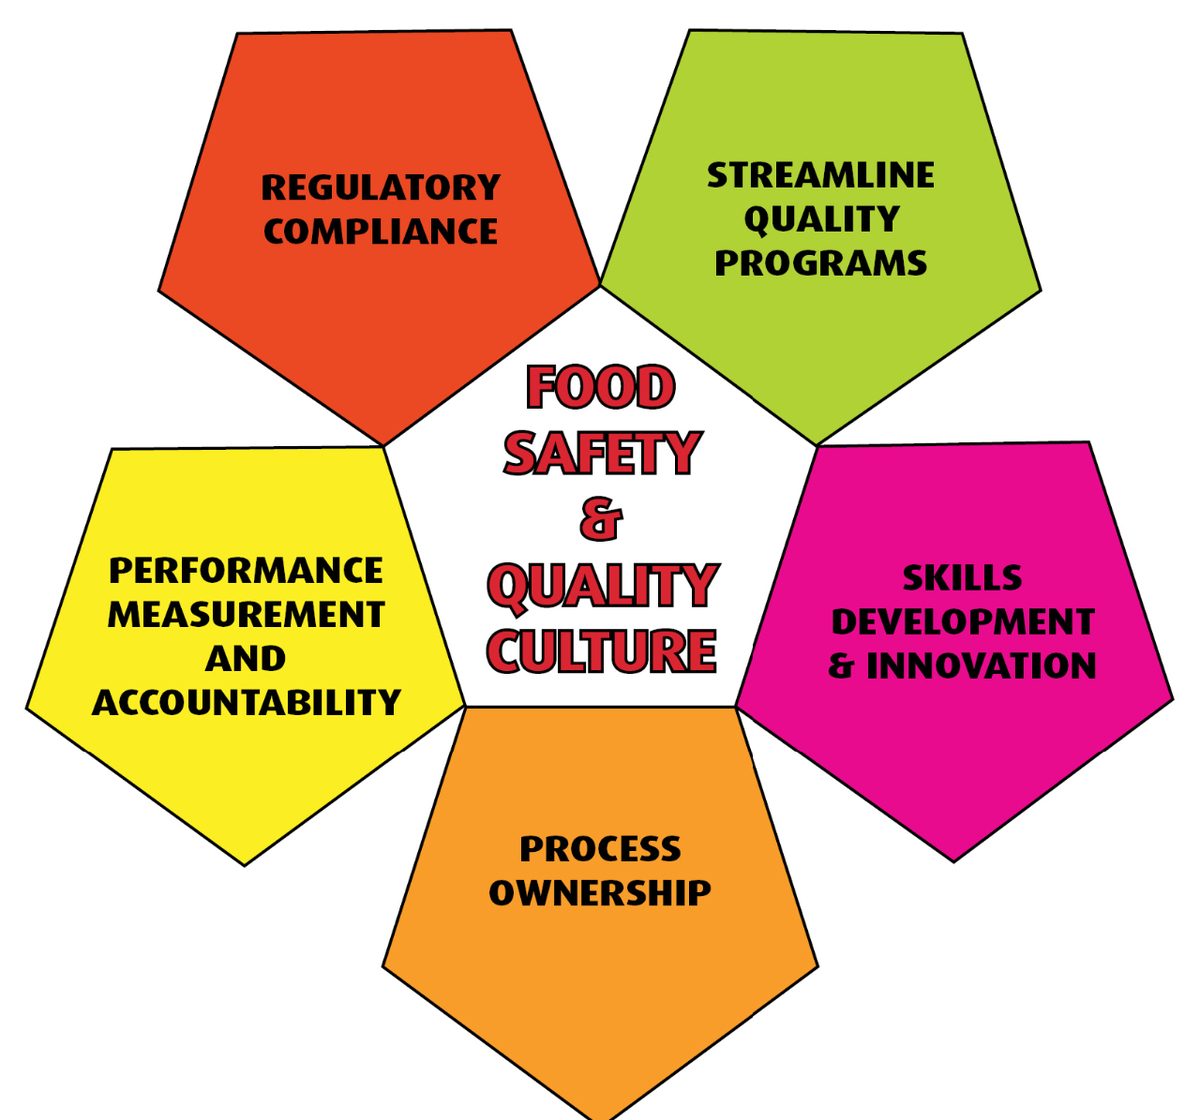 Food Safety & Quality Culture diagram 